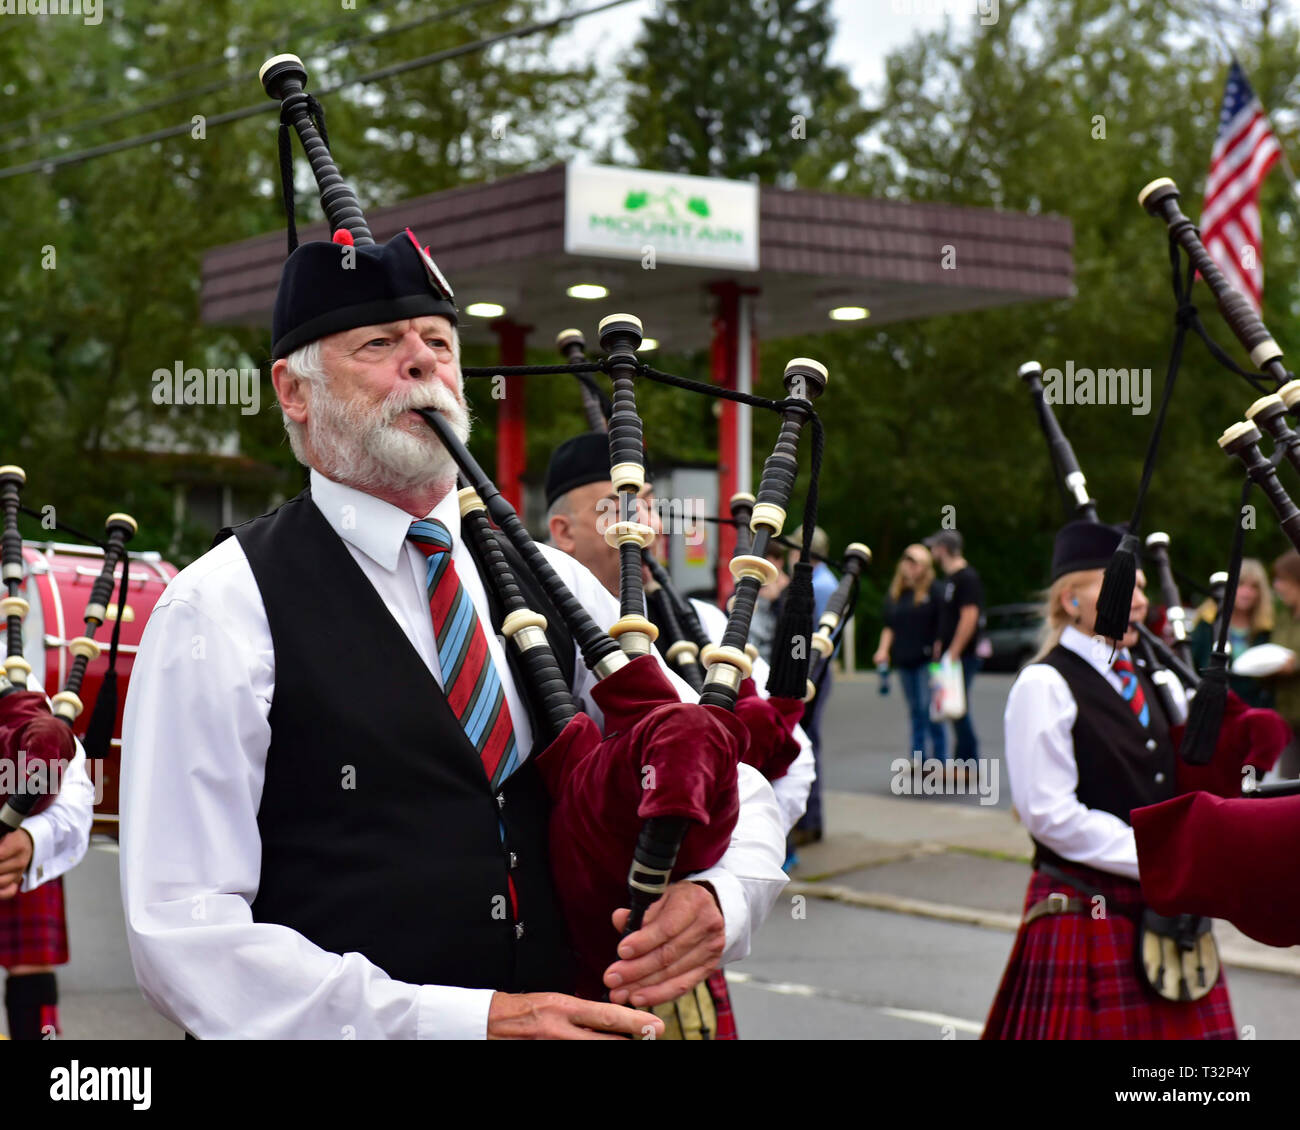 A bagpiper marching and playing in the 4th of July parade in Speculator, NY USA Stock Photo